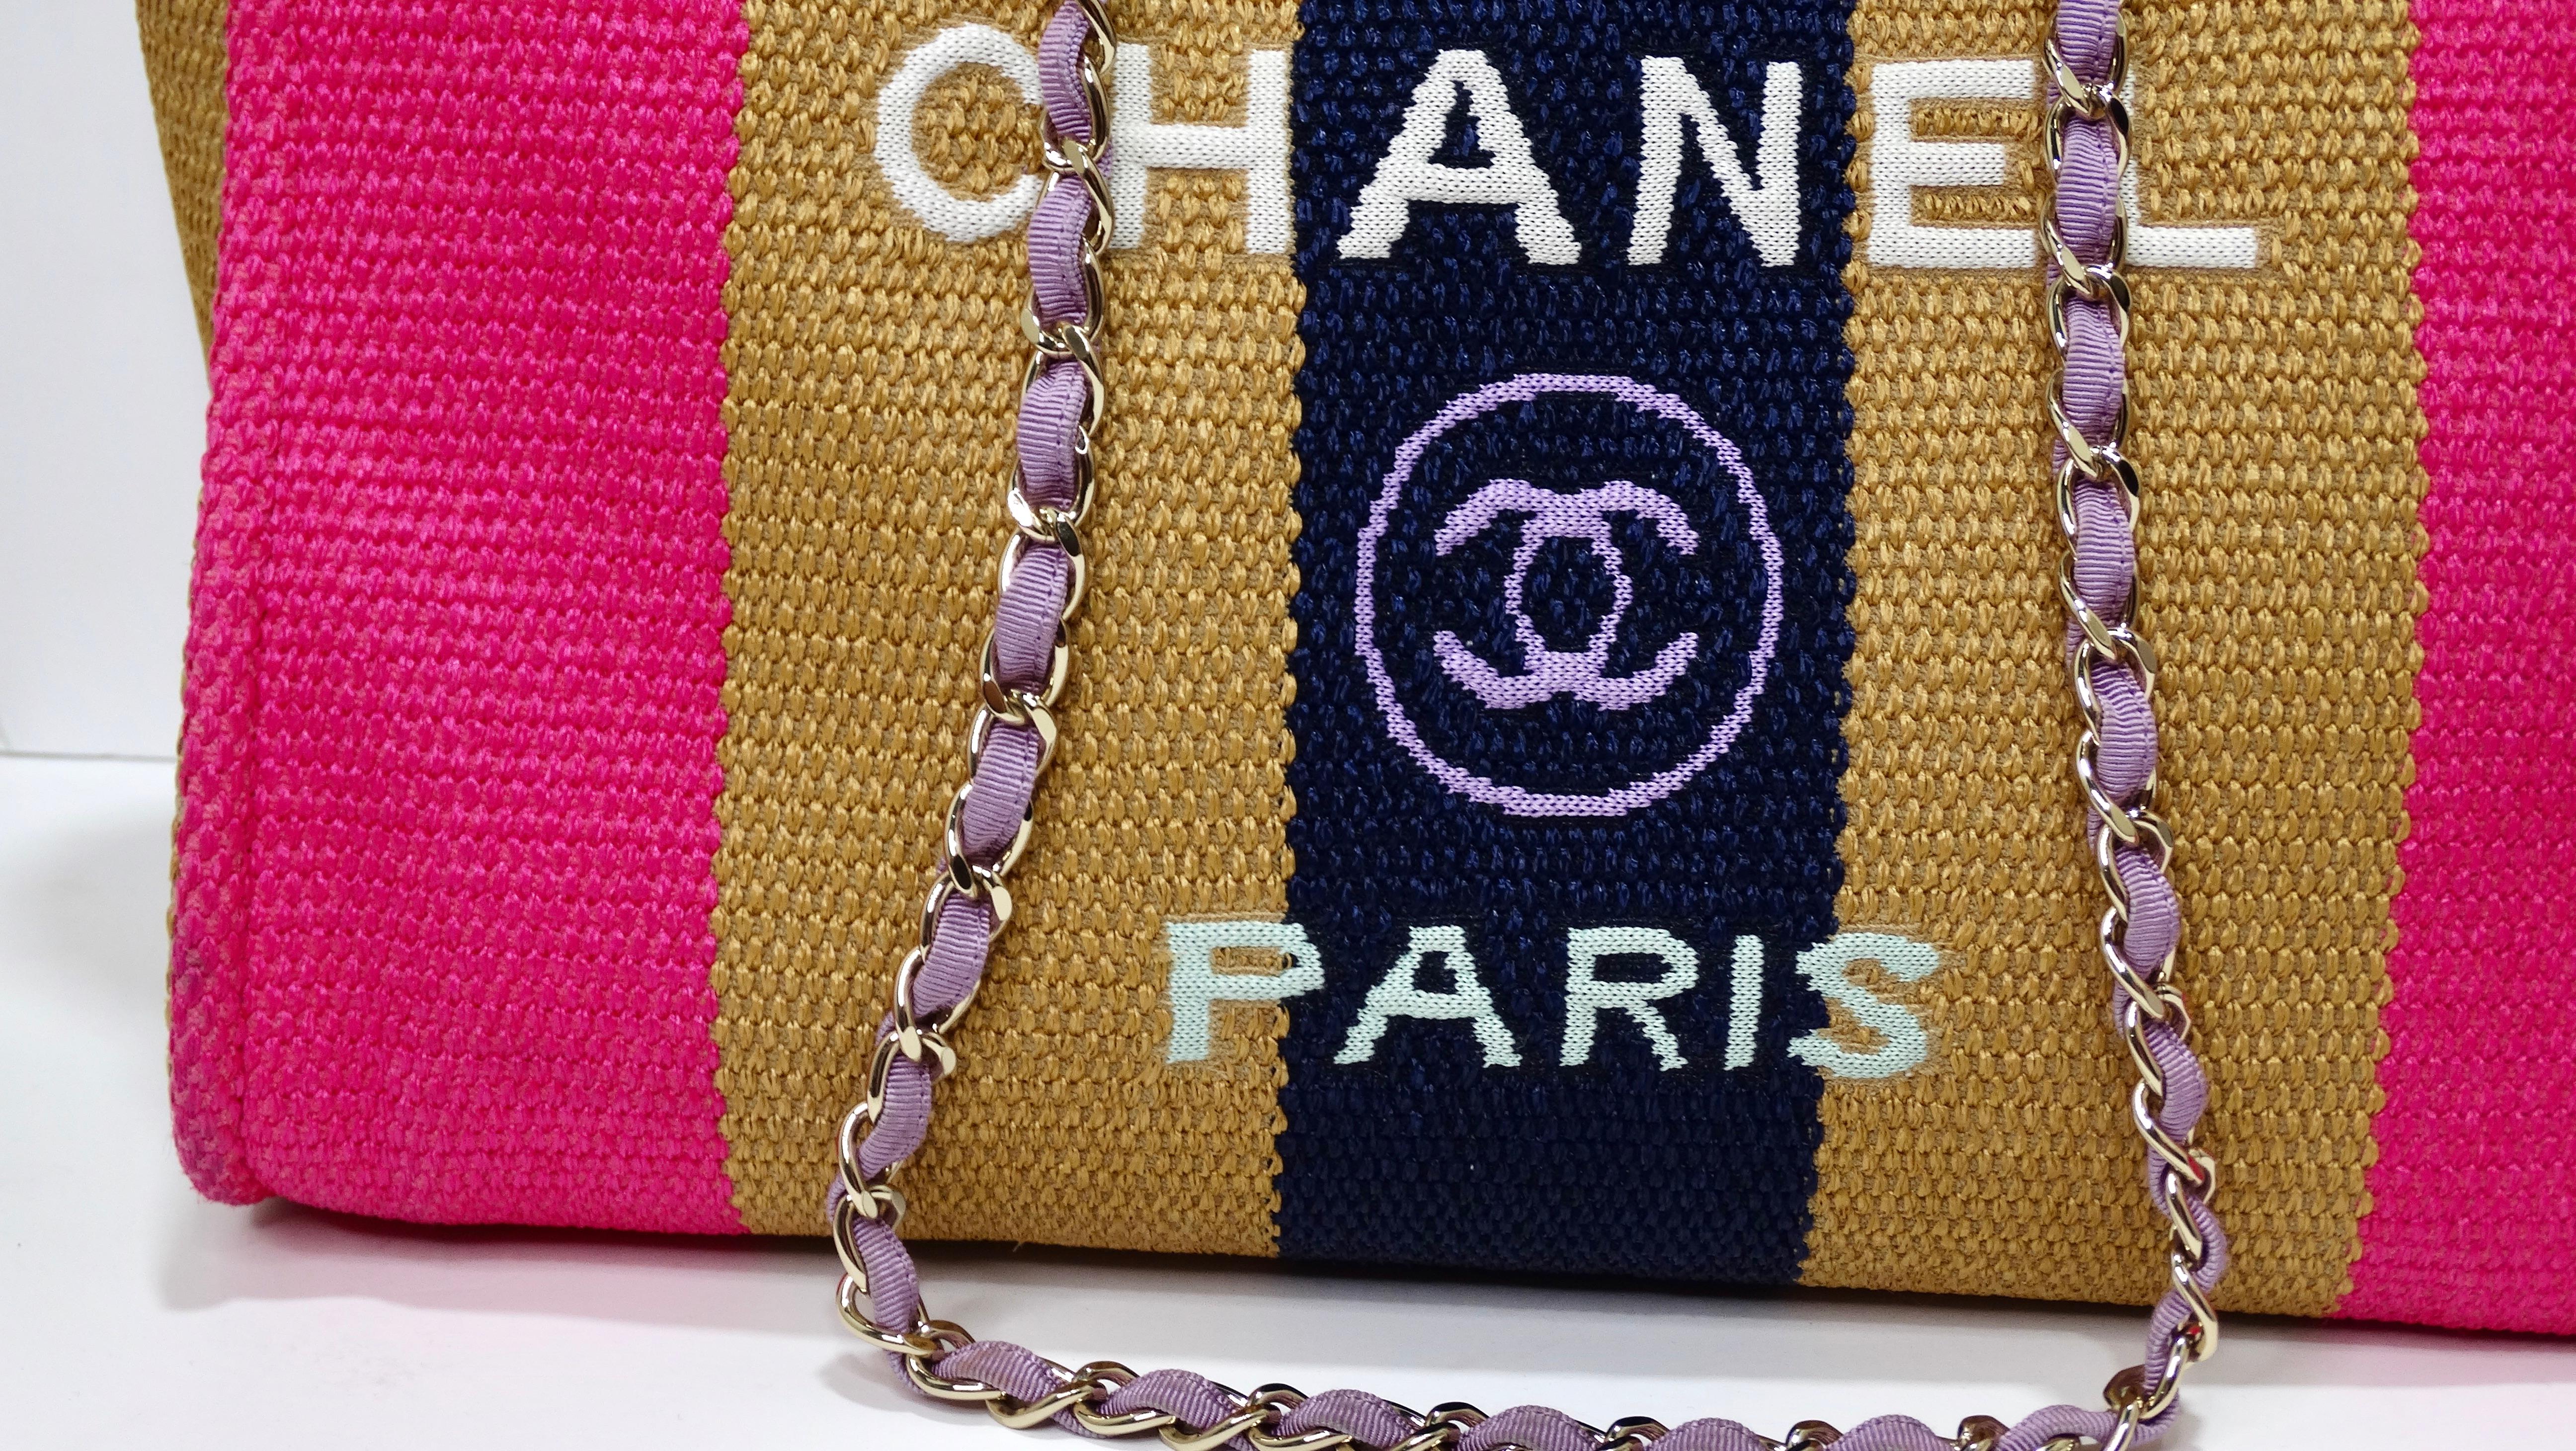 This is the most amazing and luxurious handbag from the House of Chanel featured during the 2020 cruise ready-to-wear collection! Don't miss out on the chance to have a piece of Chanel history with this contemporary gem. Everyone will be marveling